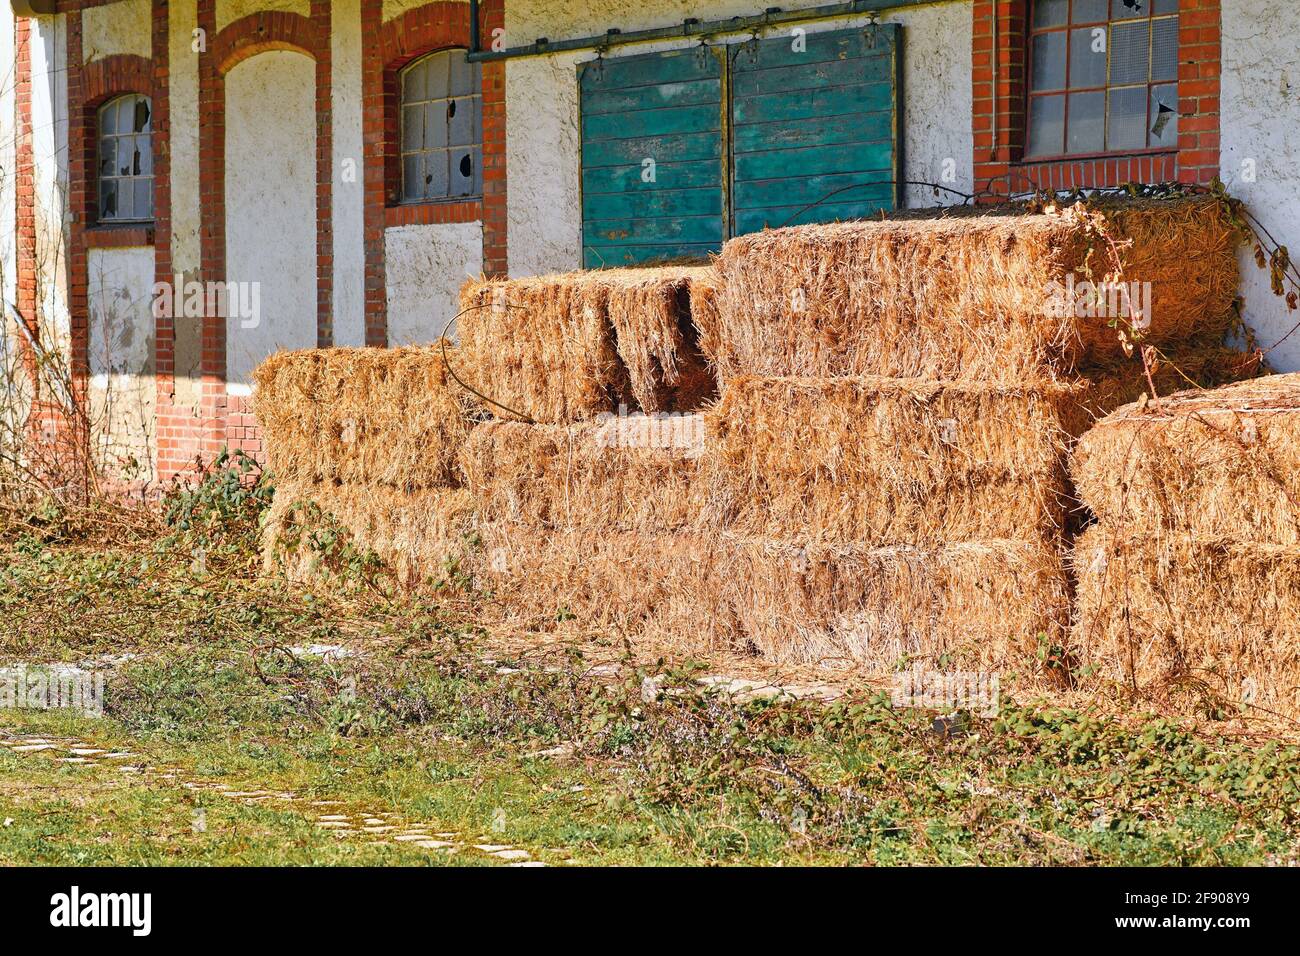 Rectangular hay bales in front of old abandoned farm building Stock Photo